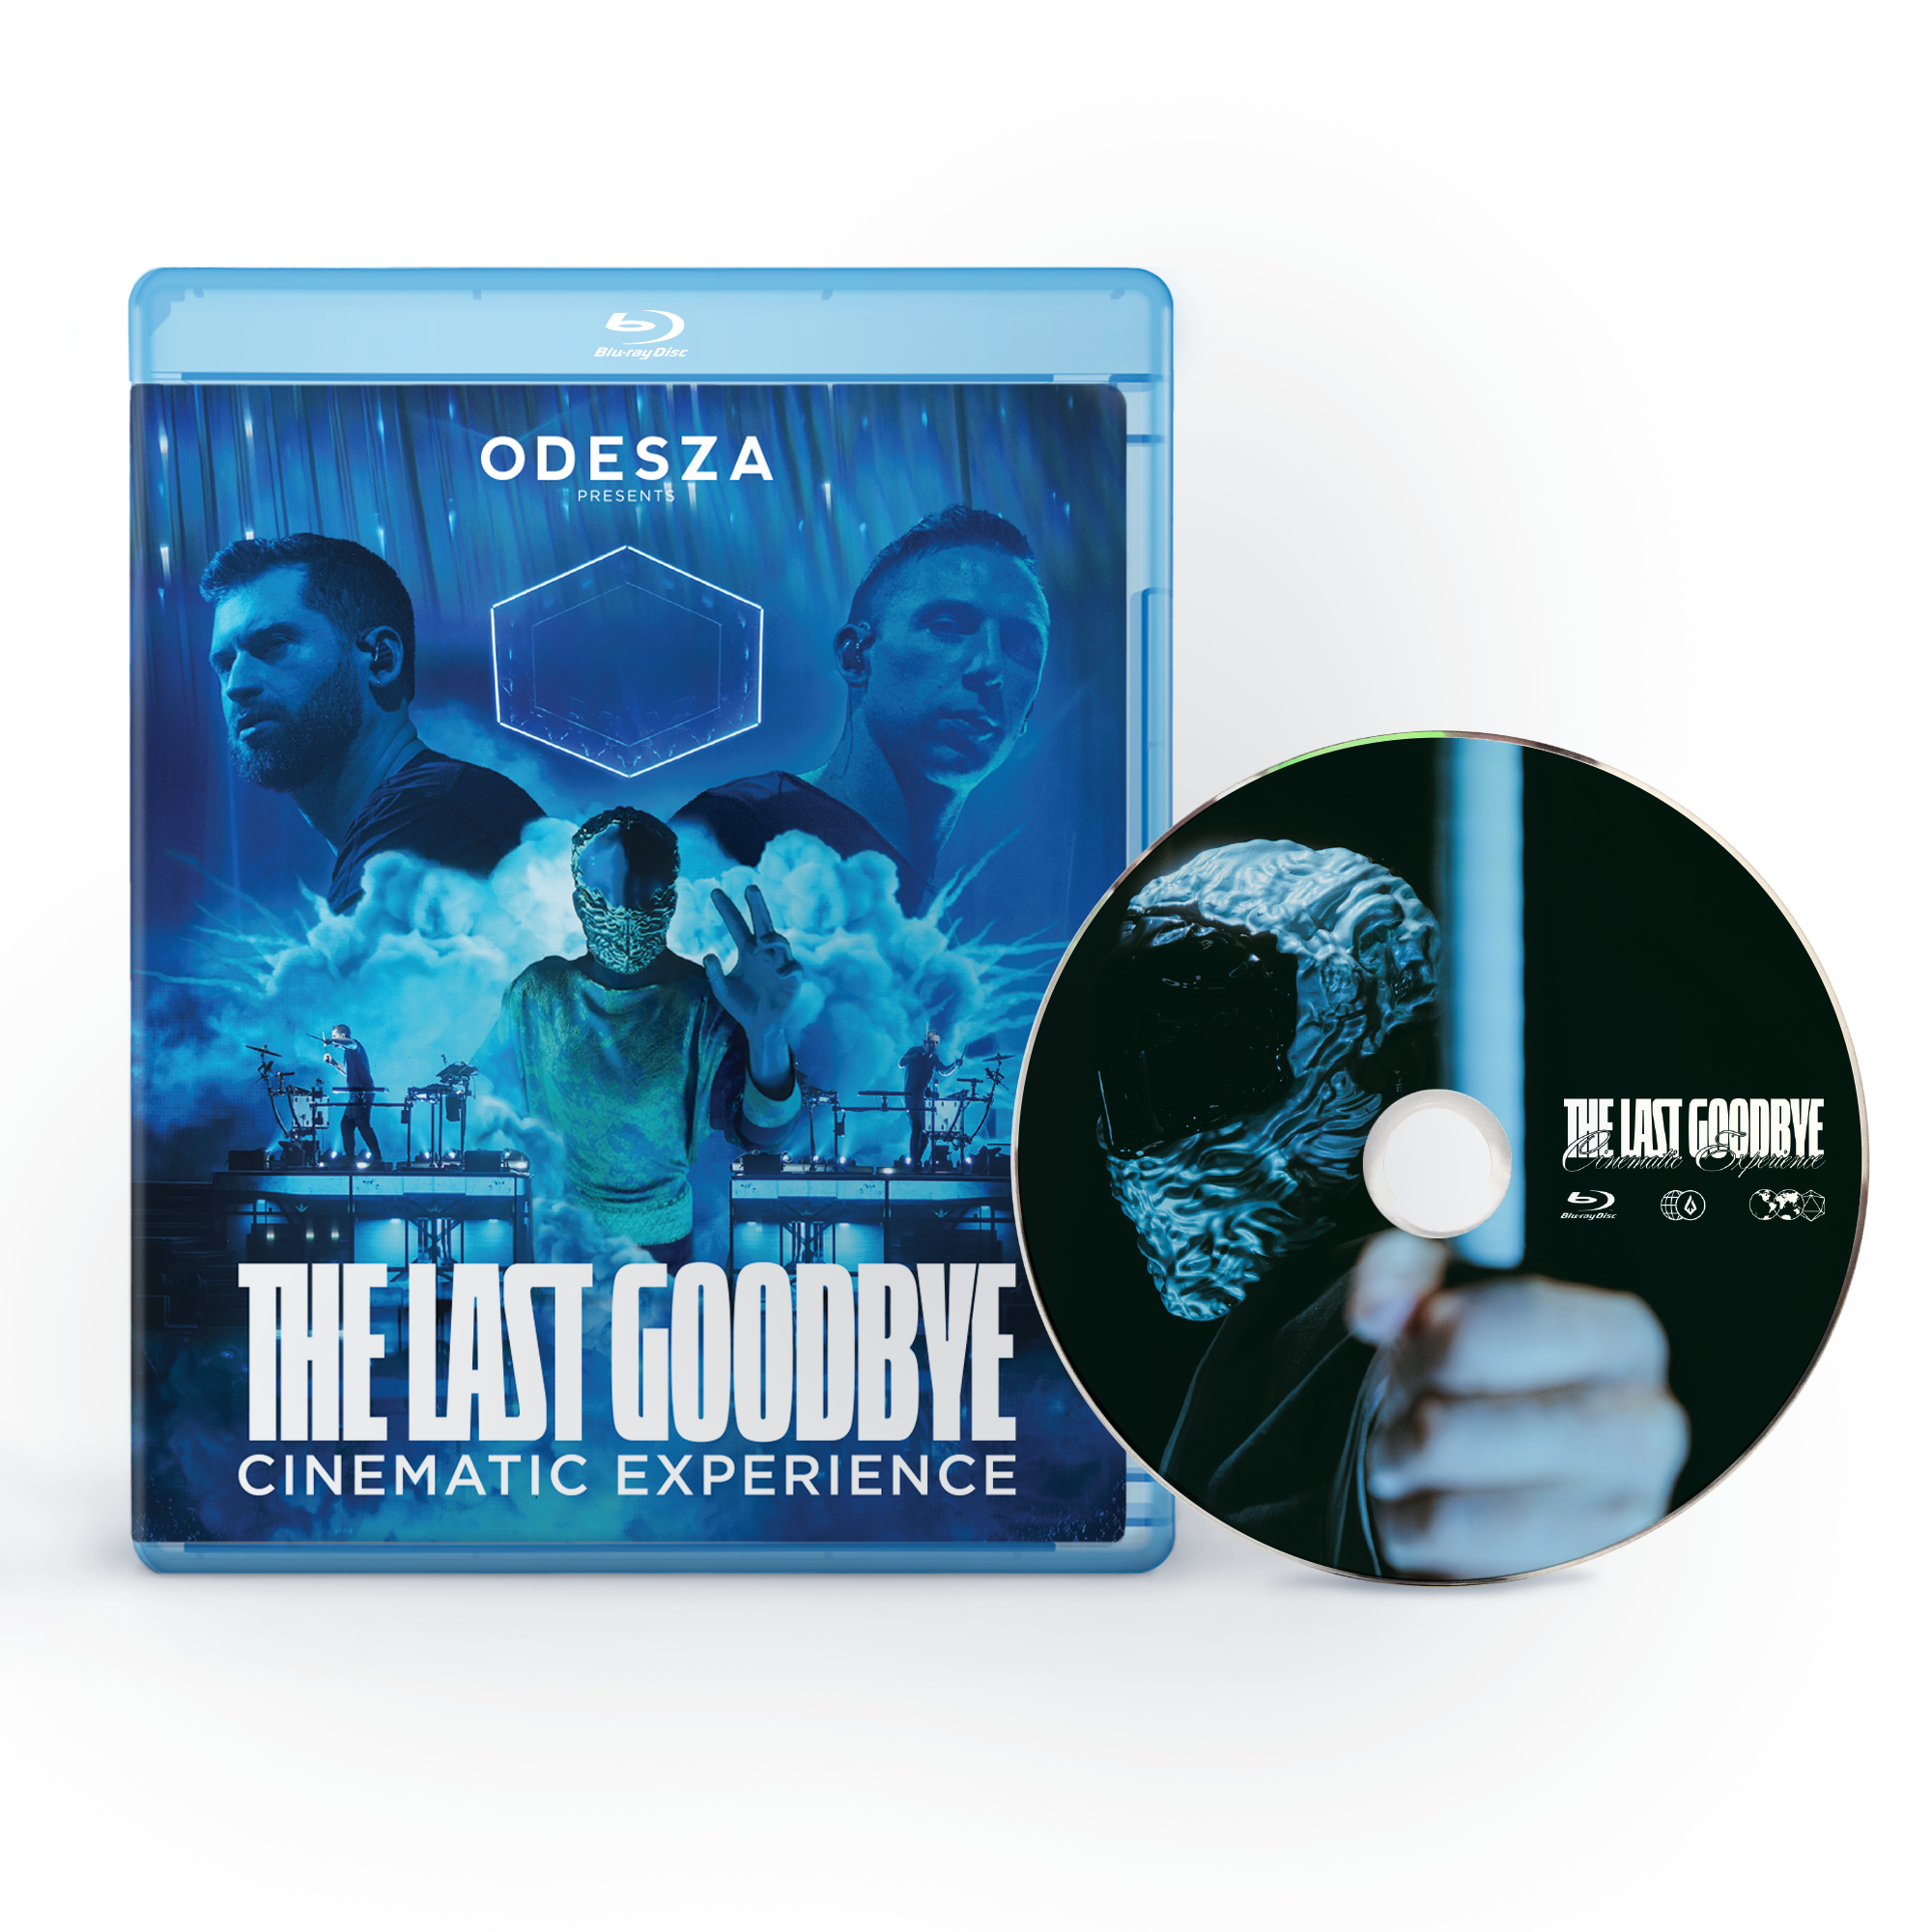 THE LAST GOODBYE CINEMATIC EXPERIENCE BLU-RAY + DIGITAL DOWNLOAD